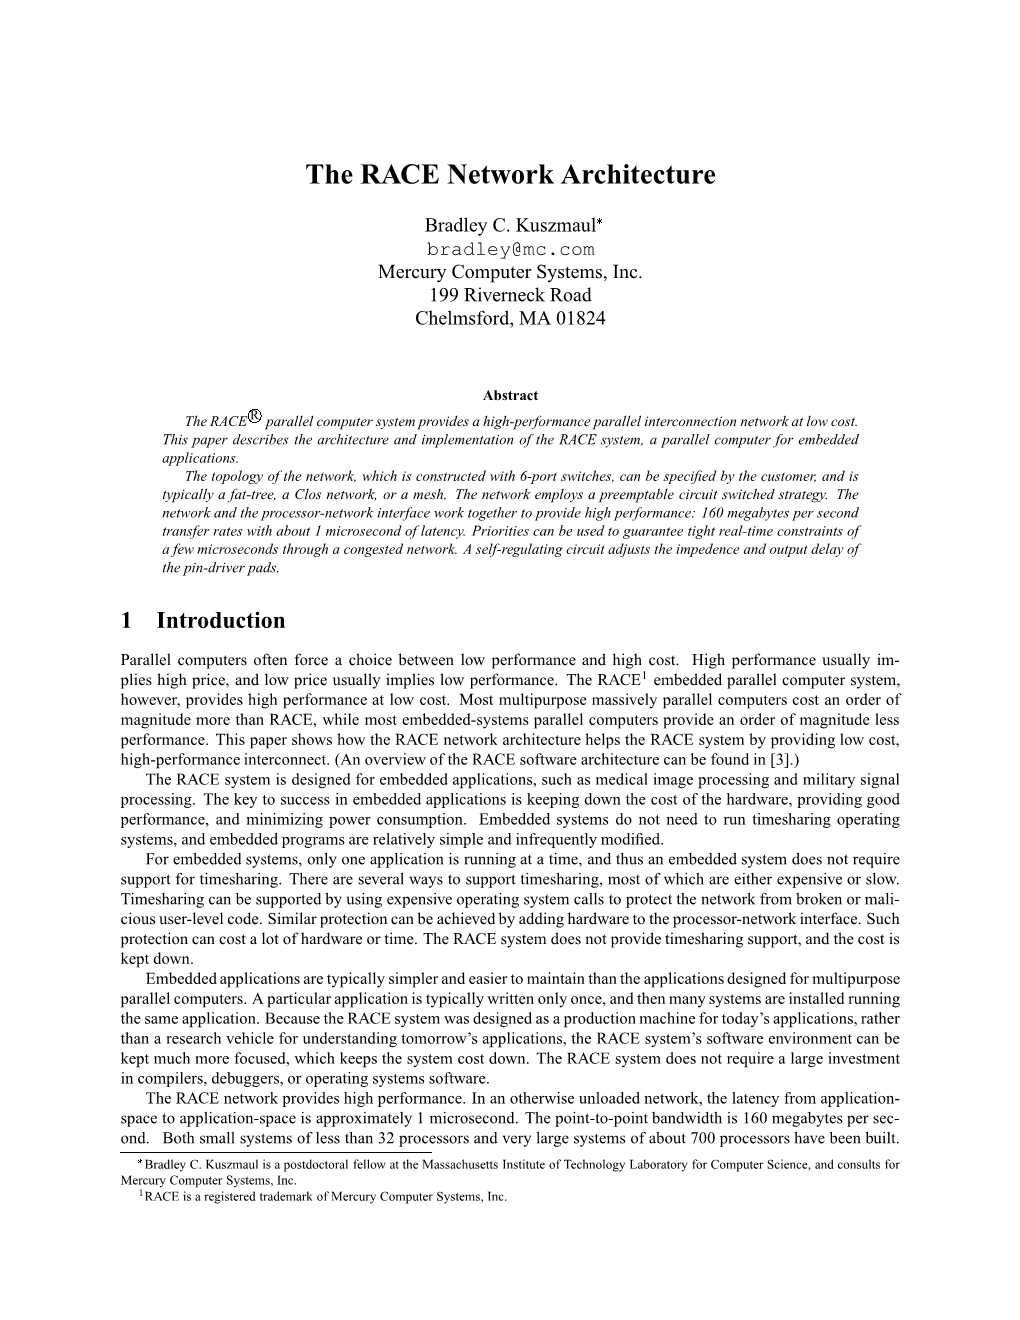 The RACE Network Architecture